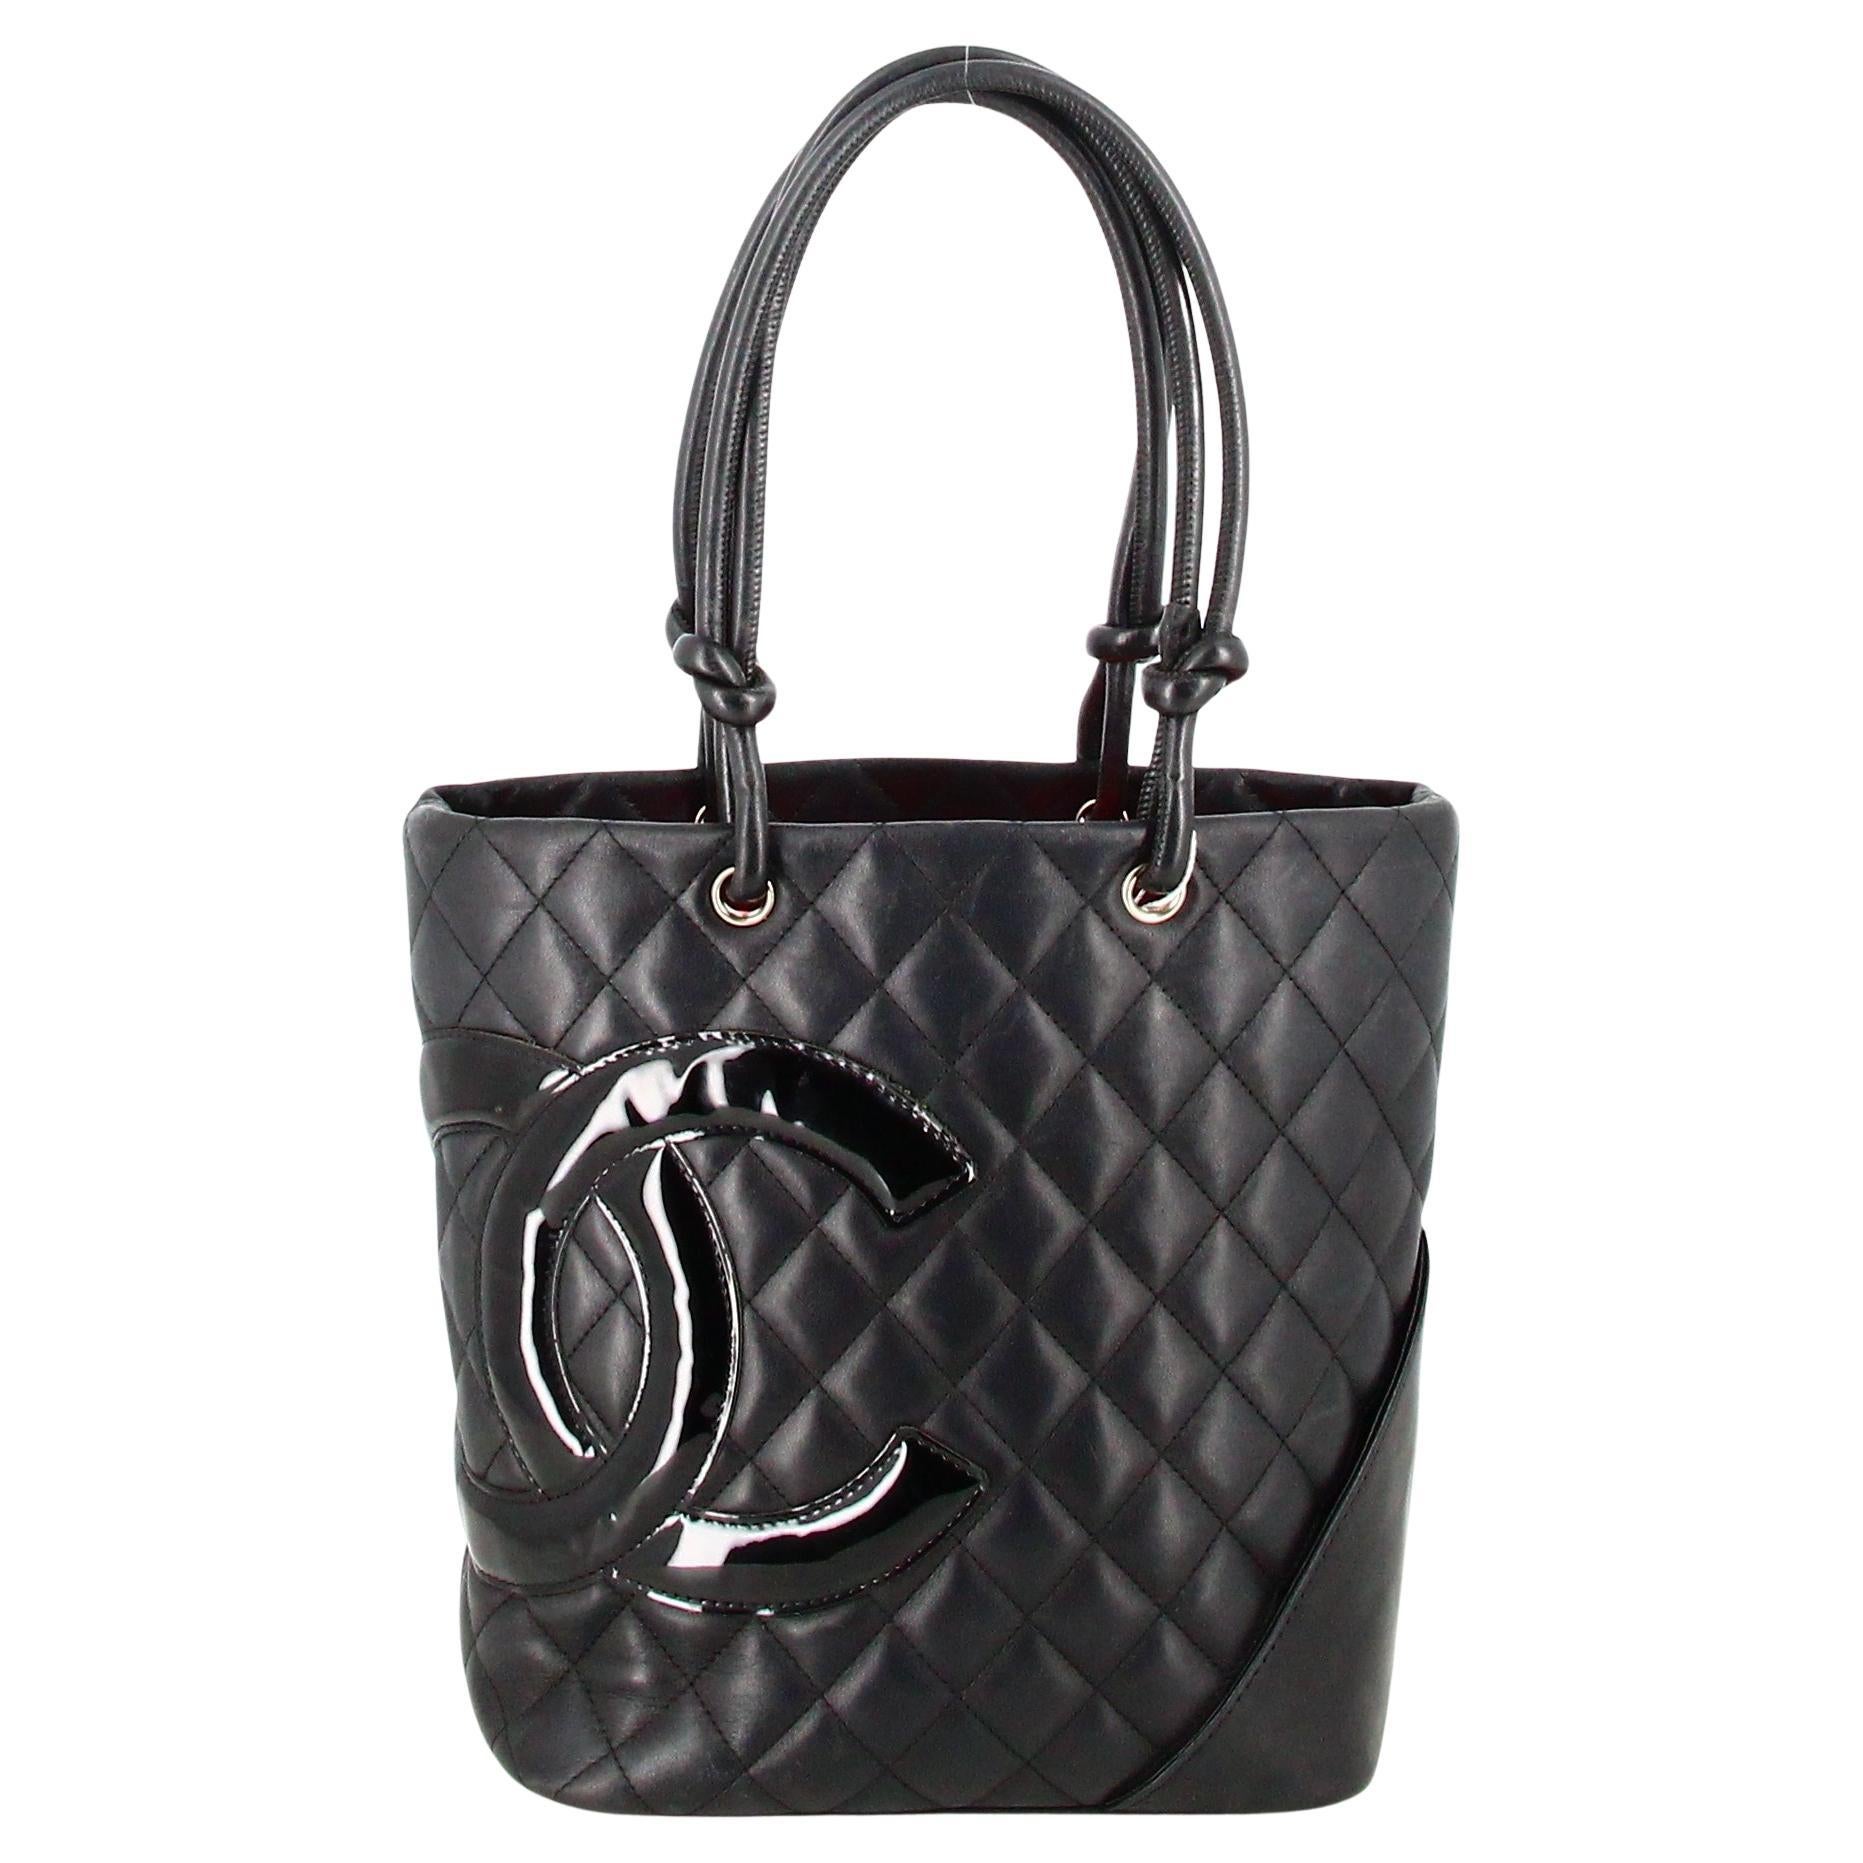 Chanel Cambon Handbag Black Quilted Leather For Sale